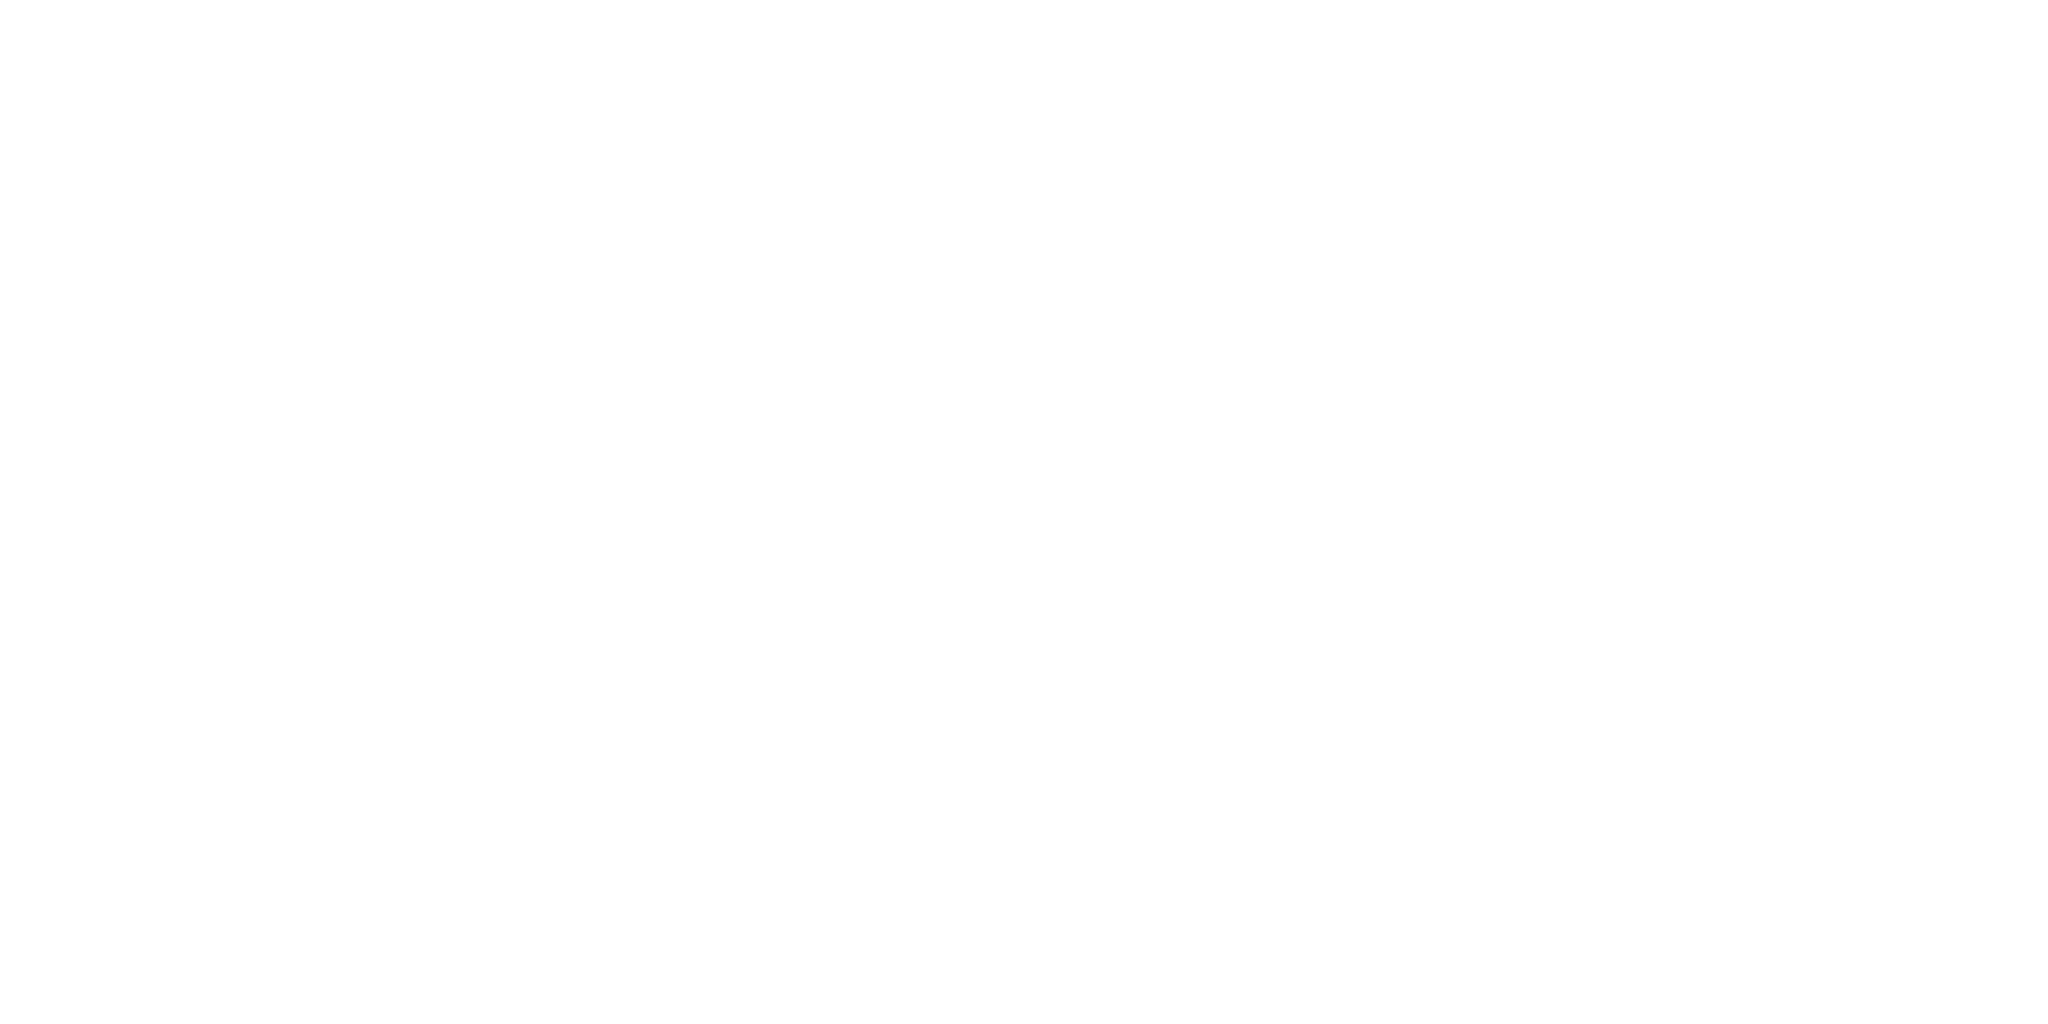 Learn Pi in 20 seconds